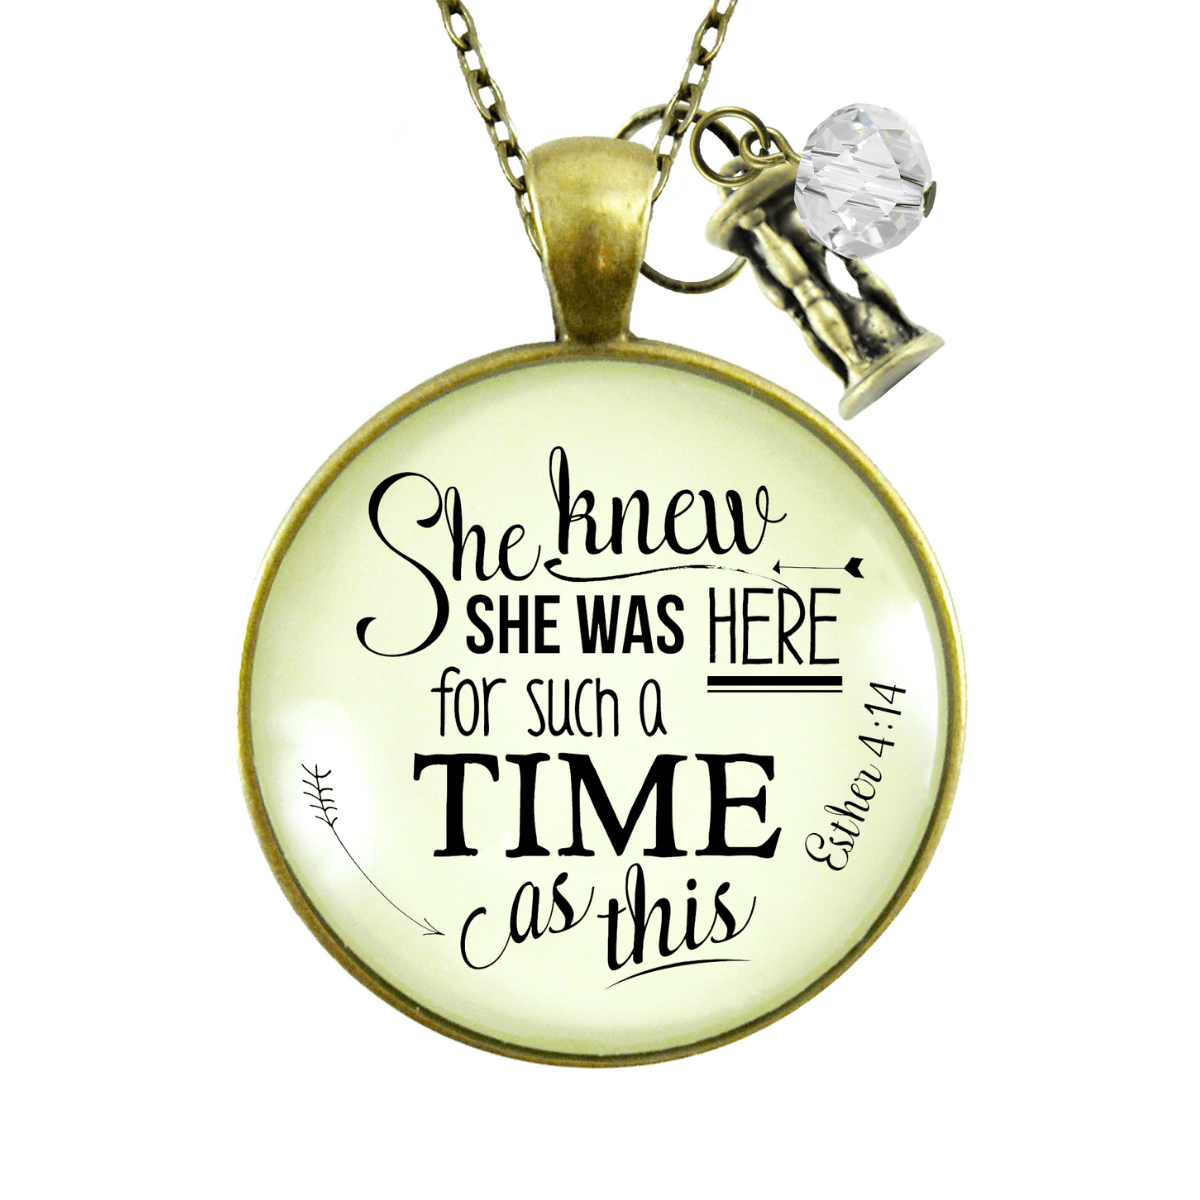 Gutsy Goodness She Was Here for Such a Time Hourglass Necklace Faith Jewelry - Gutsy Goodness;She Was Here For Such A Time Hourglass Necklace Faith Jewelry - Gutsy Goodness Handmade Jewelry Gifts